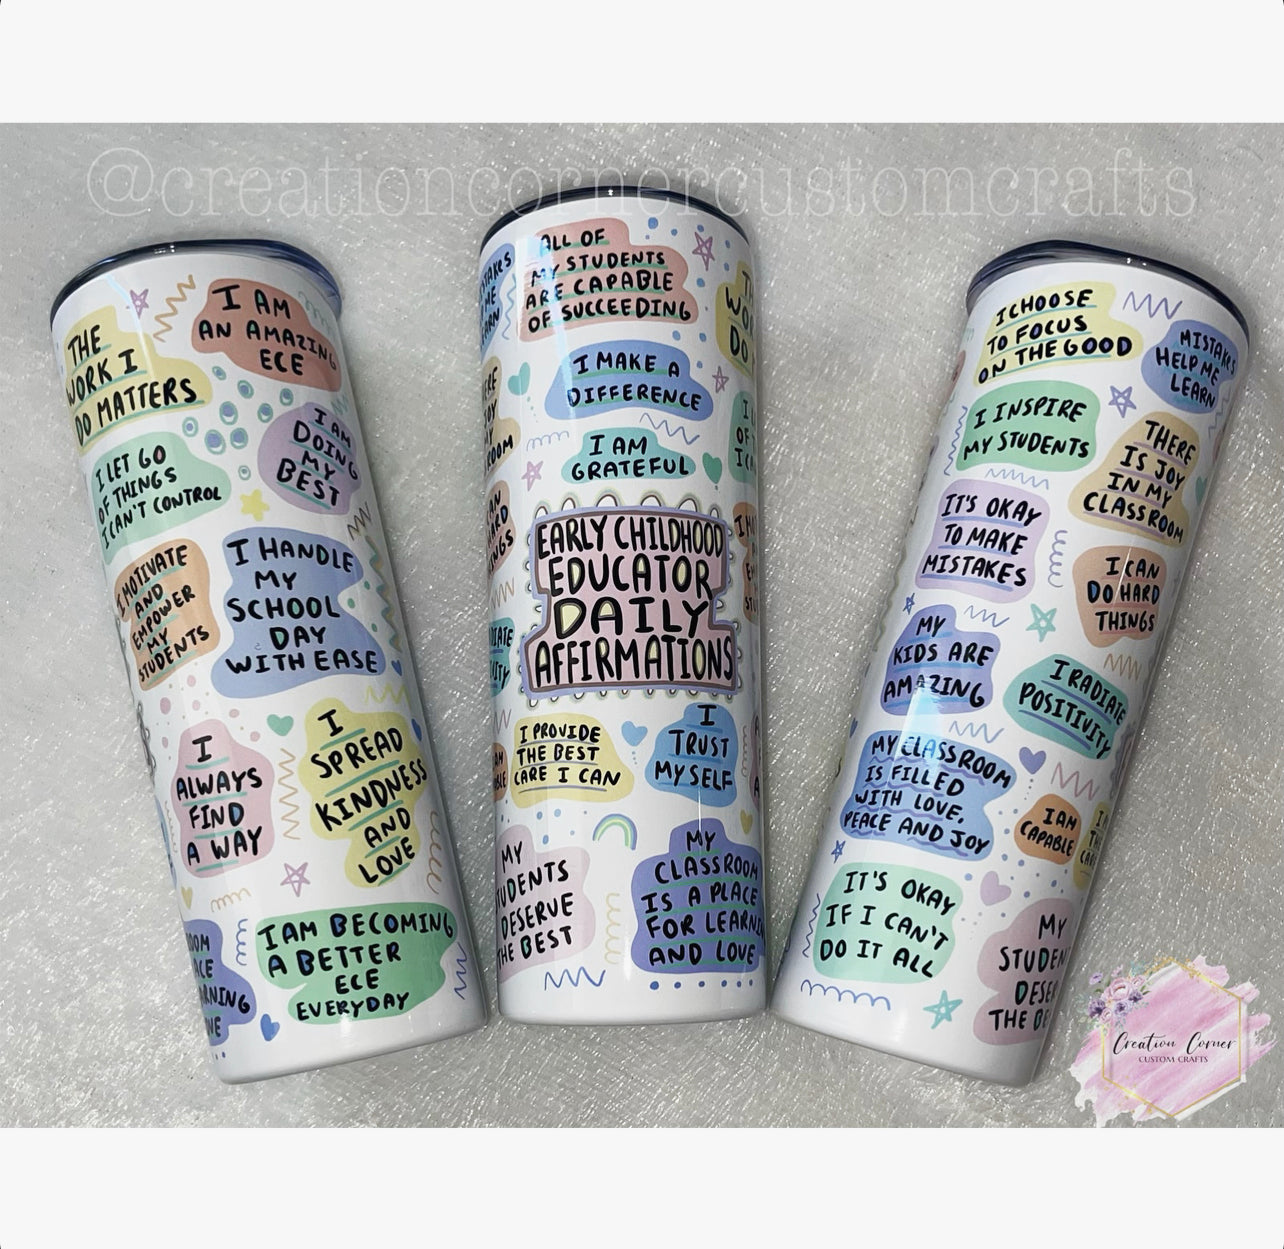 Early Childhood Educator Daily Affirmations 20oz Insulated Tumbler